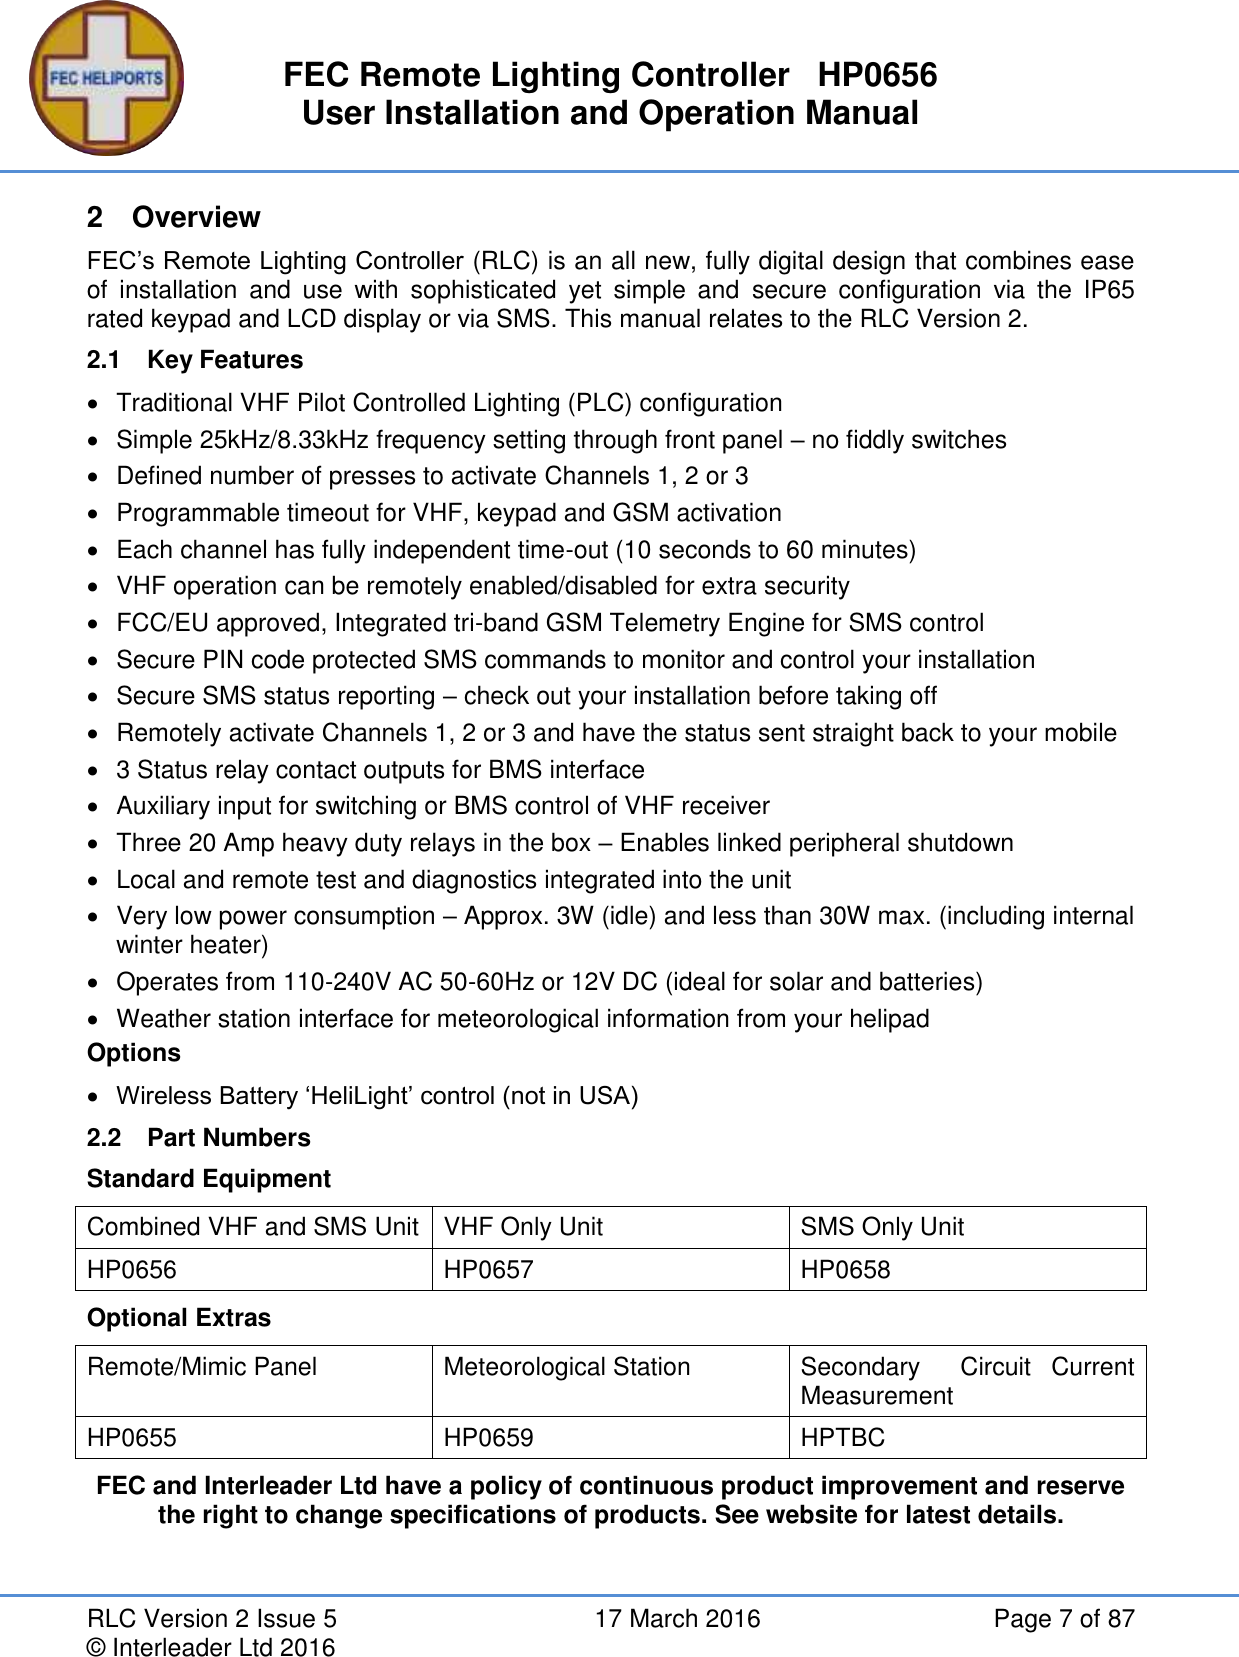 FEC Remote Lighting Controller   HP0656 User Installation and Operation Manual RLC Version 2 Issue 5  17 March 2016  Page 7 of 87 © Interleader Ltd 2016 2  Overview FEC’s Remote Lighting Controller (RLC) is an all new, fully digital design that combines ease of  installation  and  use  with  sophisticated  yet  simple  and  secure  configuration  via  the  IP65 rated keypad and LCD display or via SMS. This manual relates to the RLC Version 2. 2.1  Key Features   Traditional VHF Pilot Controlled Lighting (PLC) configuration   Simple 25kHz/8.33kHz frequency setting through front panel – no fiddly switches   Defined number of presses to activate Channels 1, 2 or 3   Programmable timeout for VHF, keypad and GSM activation   Each channel has fully independent time-out (10 seconds to 60 minutes)   VHF operation can be remotely enabled/disabled for extra security   FCC/EU approved, Integrated tri-band GSM Telemetry Engine for SMS control   Secure PIN code protected SMS commands to monitor and control your installation   Secure SMS status reporting – check out your installation before taking off   Remotely activate Channels 1, 2 or 3 and have the status sent straight back to your mobile   3 Status relay contact outputs for BMS interface   Auxiliary input for switching or BMS control of VHF receiver   Three 20 Amp heavy duty relays in the box – Enables linked peripheral shutdown   Local and remote test and diagnostics integrated into the unit   Very low power consumption – Approx. 3W (idle) and less than 30W max. (including internal winter heater)   Operates from 110-240V AC 50-60Hz or 12V DC (ideal for solar and batteries)   Weather station interface for meteorological information from your helipad  Options  Wireless Battery ‘HeliLight’ control (not in USA) 2.2  Part Numbers Standard Equipment Combined VHF and SMS Unit VHF Only Unit SMS Only Unit HP0656 HP0657 HP0658 Optional Extras Remote/Mimic Panel Meteorological Station Secondary    Circuit  Current Measurement HP0655 HP0659 HPTBC FEC and Interleader Ltd have a policy of continuous product improvement and reserve the right to change specifications of products. See website for latest details.    